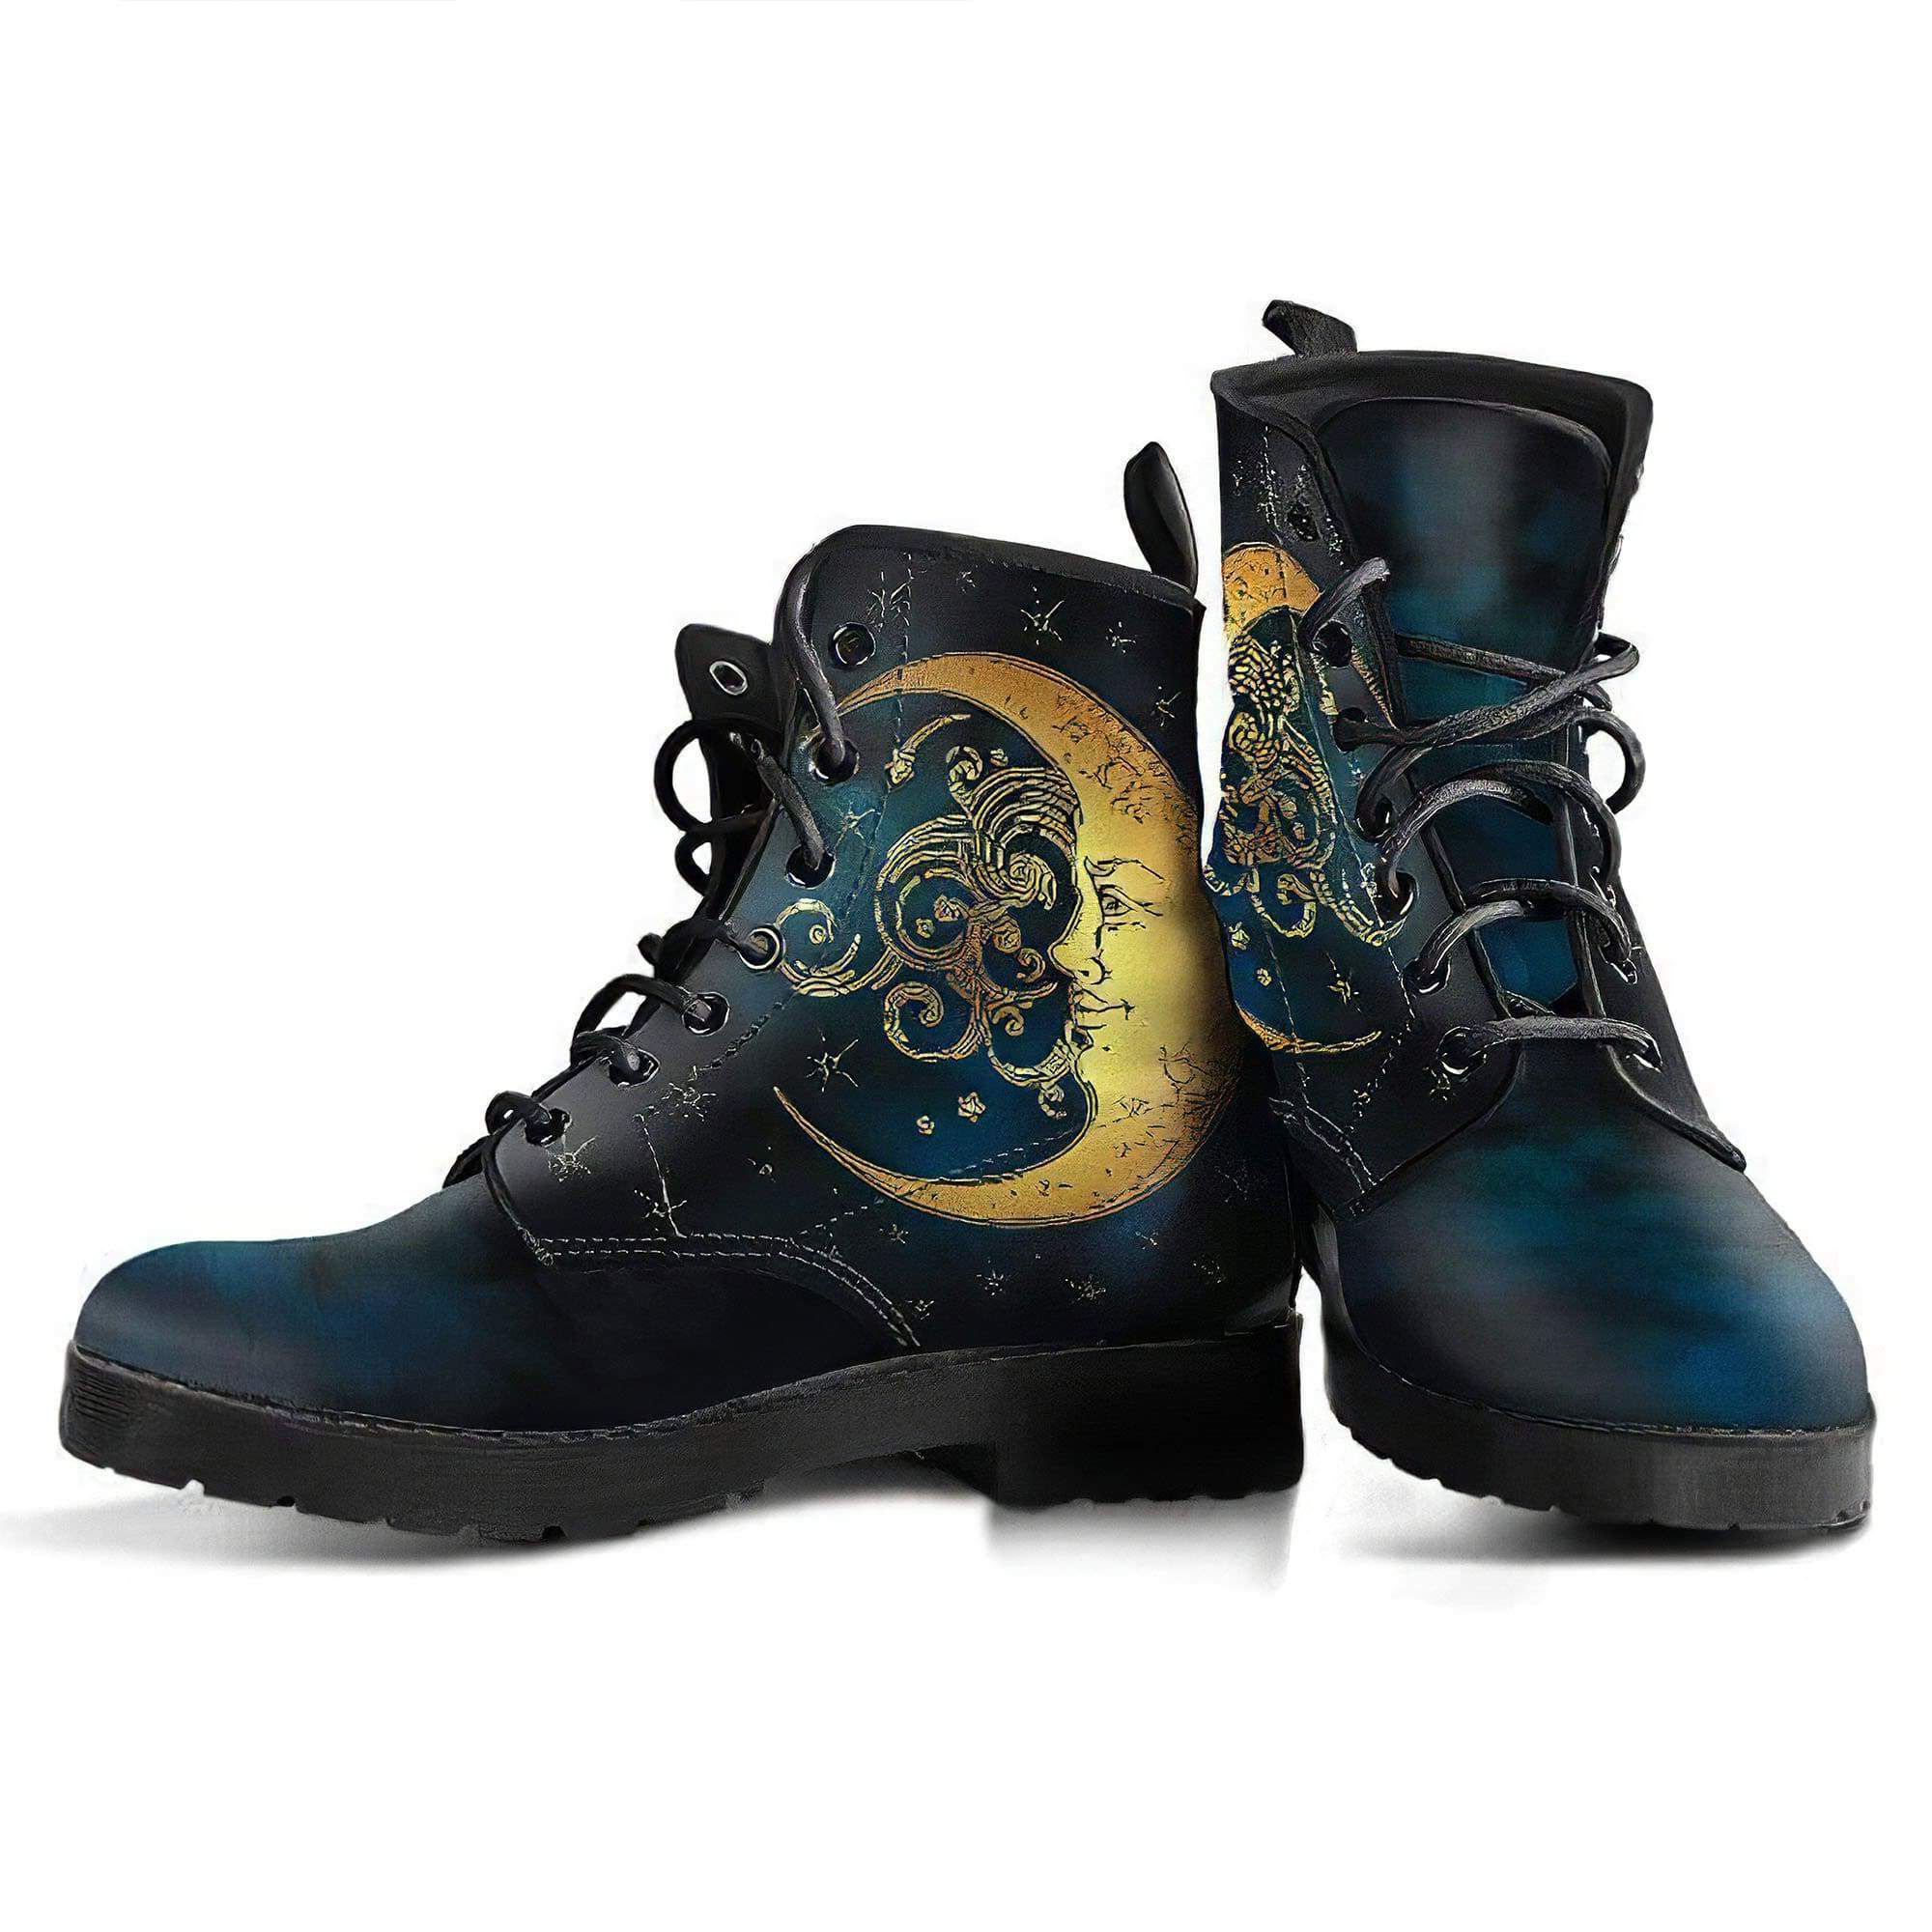 moon-with-swirl-handcrafted-boots-women-s-leather-boots-12051912196157.jpg